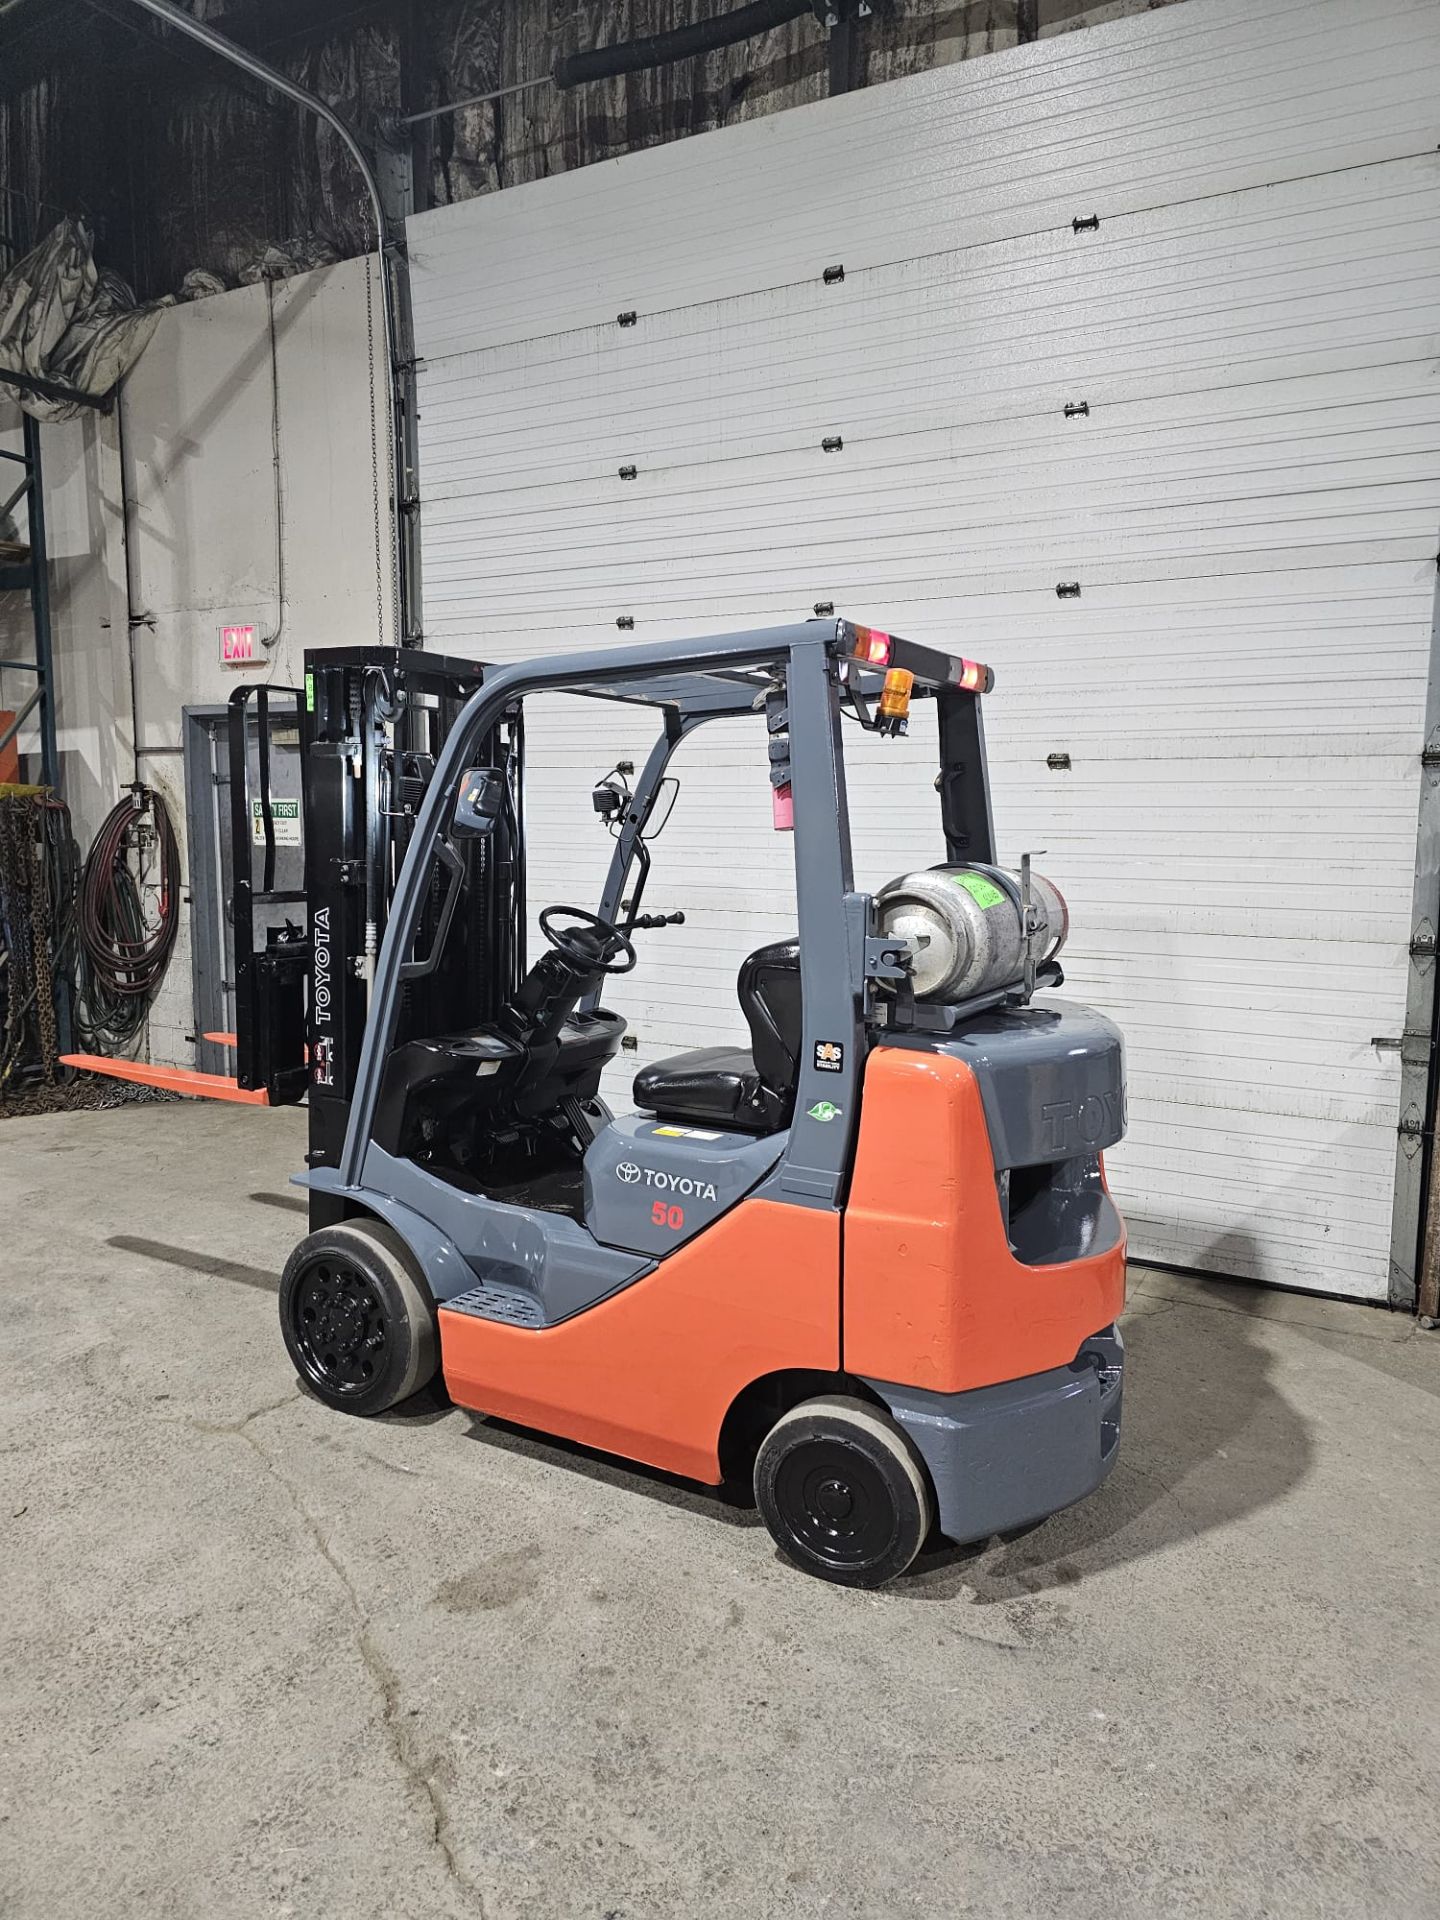 2016 TOYOTA 5,000lbs Capacity LPG (Propane) Forklift with sideshift with 3-STAGE MAST (no propane - Image 2 of 5